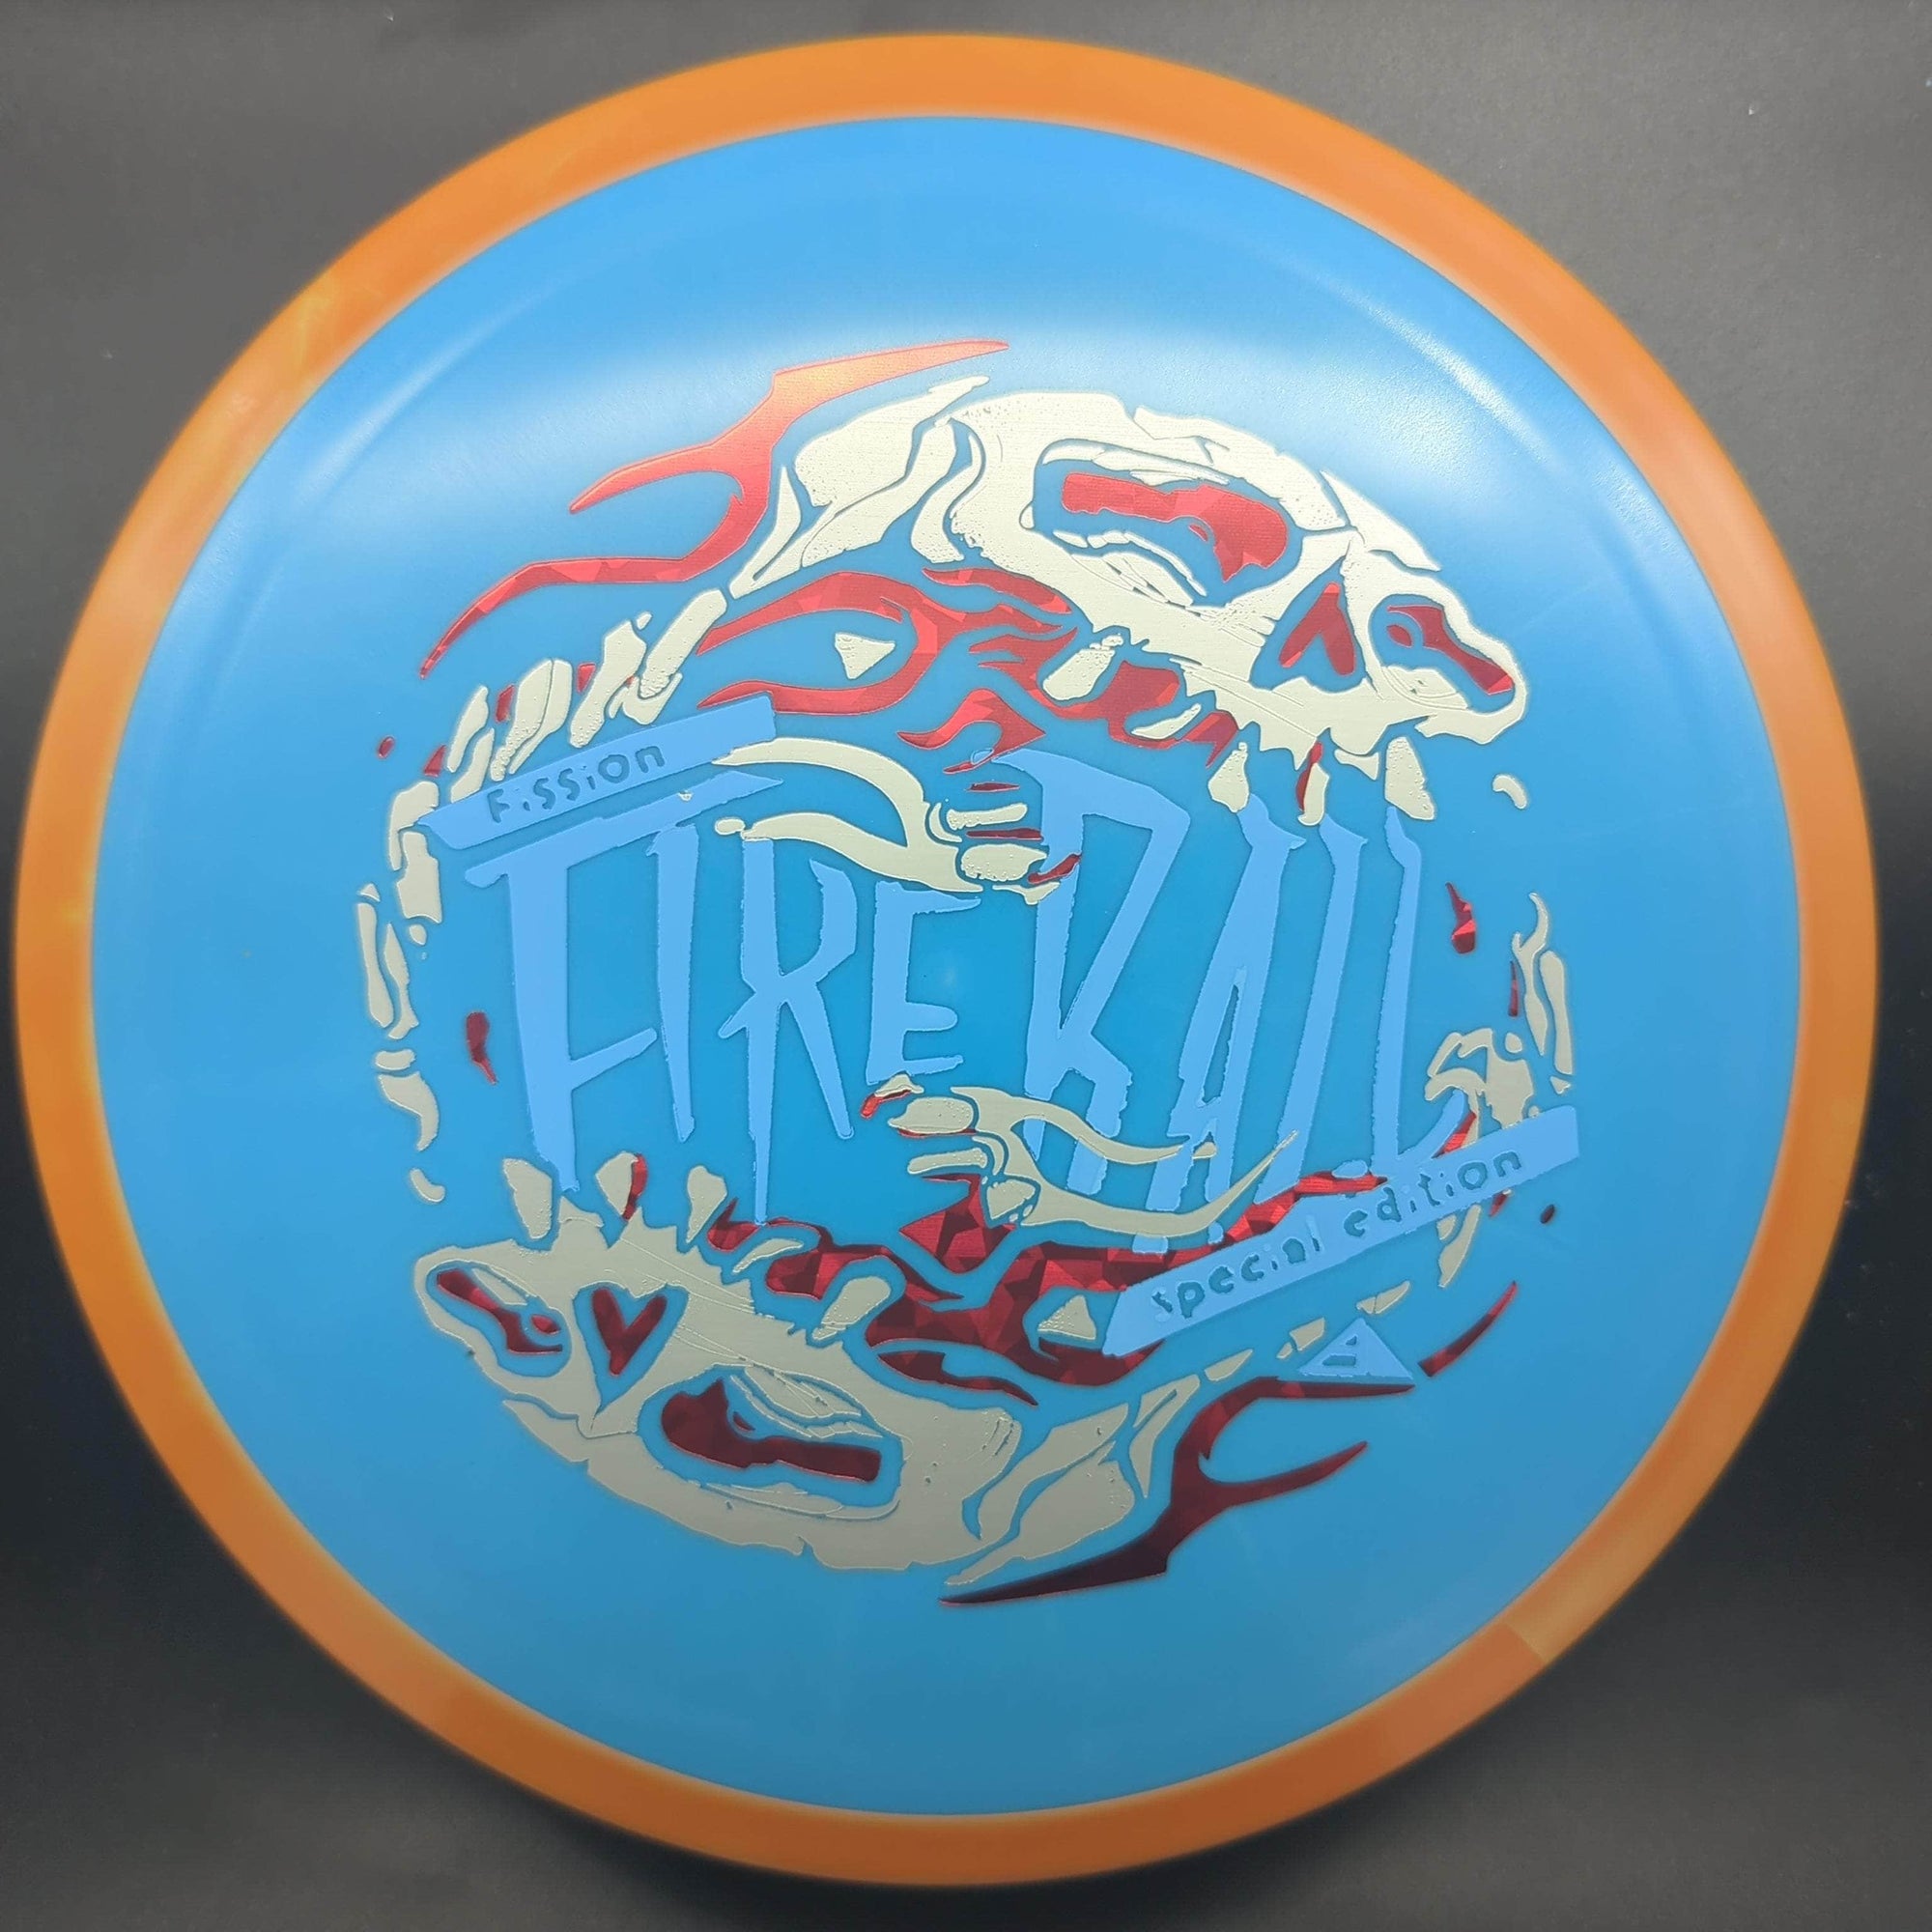 MVP Fairway Driver Orange Rim Blue Plate Red/Silver/Blue Stamp 172g Fireball, Fission Plastic, Special Edition